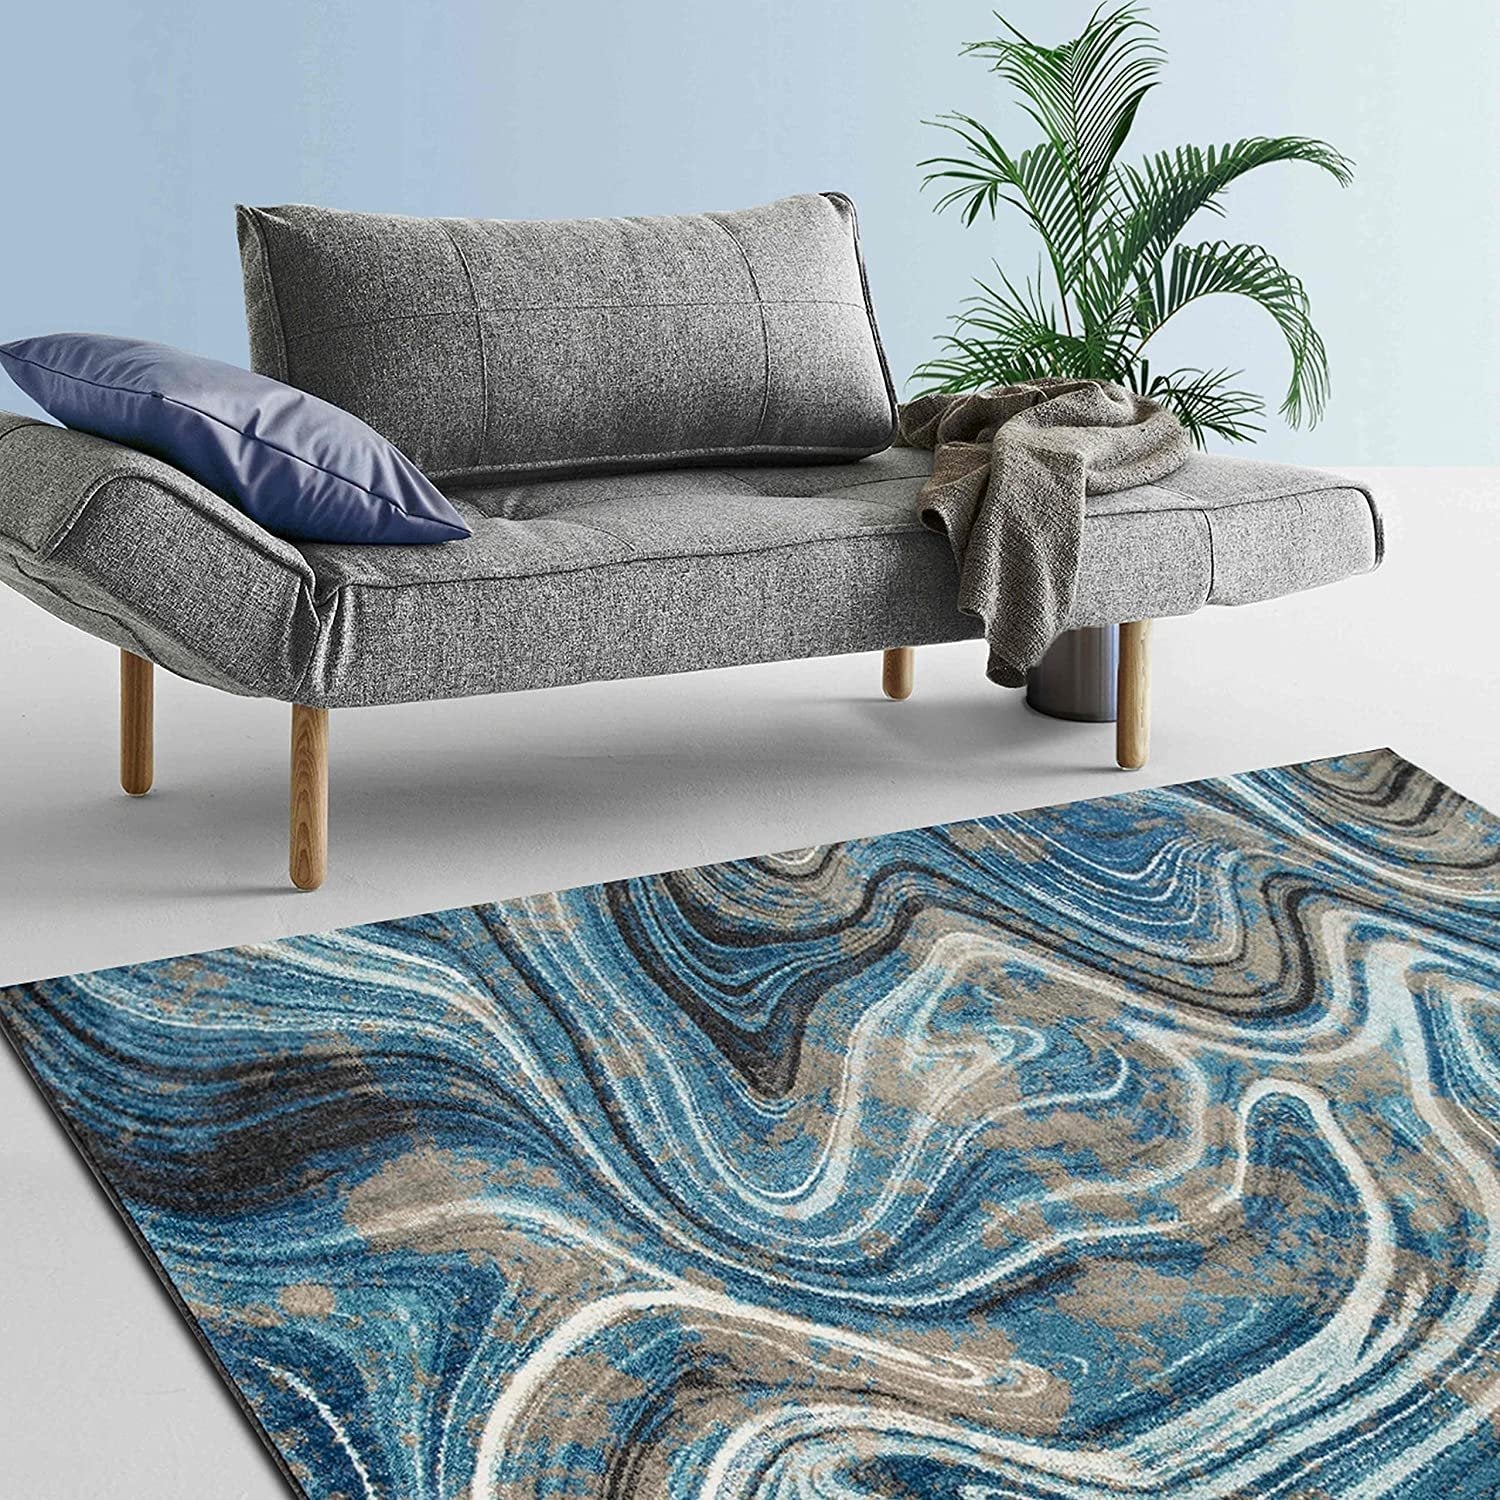 Marble Rugs Grey Blue Multi Color Abstract #77